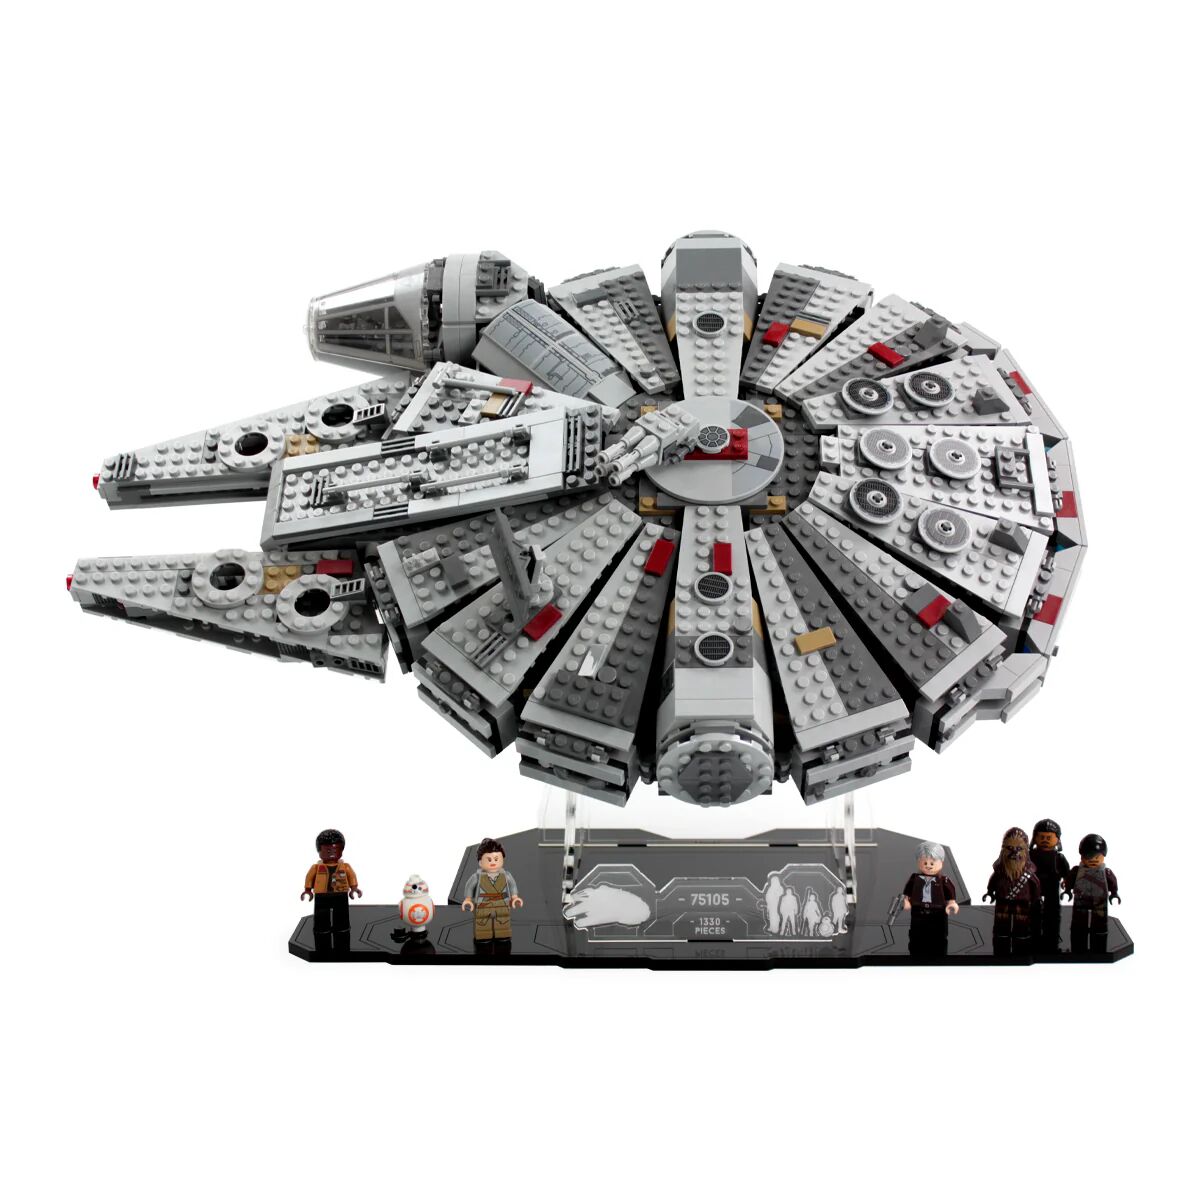 Wicked Brick Display stand for LEGO® Star Wars™ Millennium Falcon (75105) - Display stand and Minifigure add-on